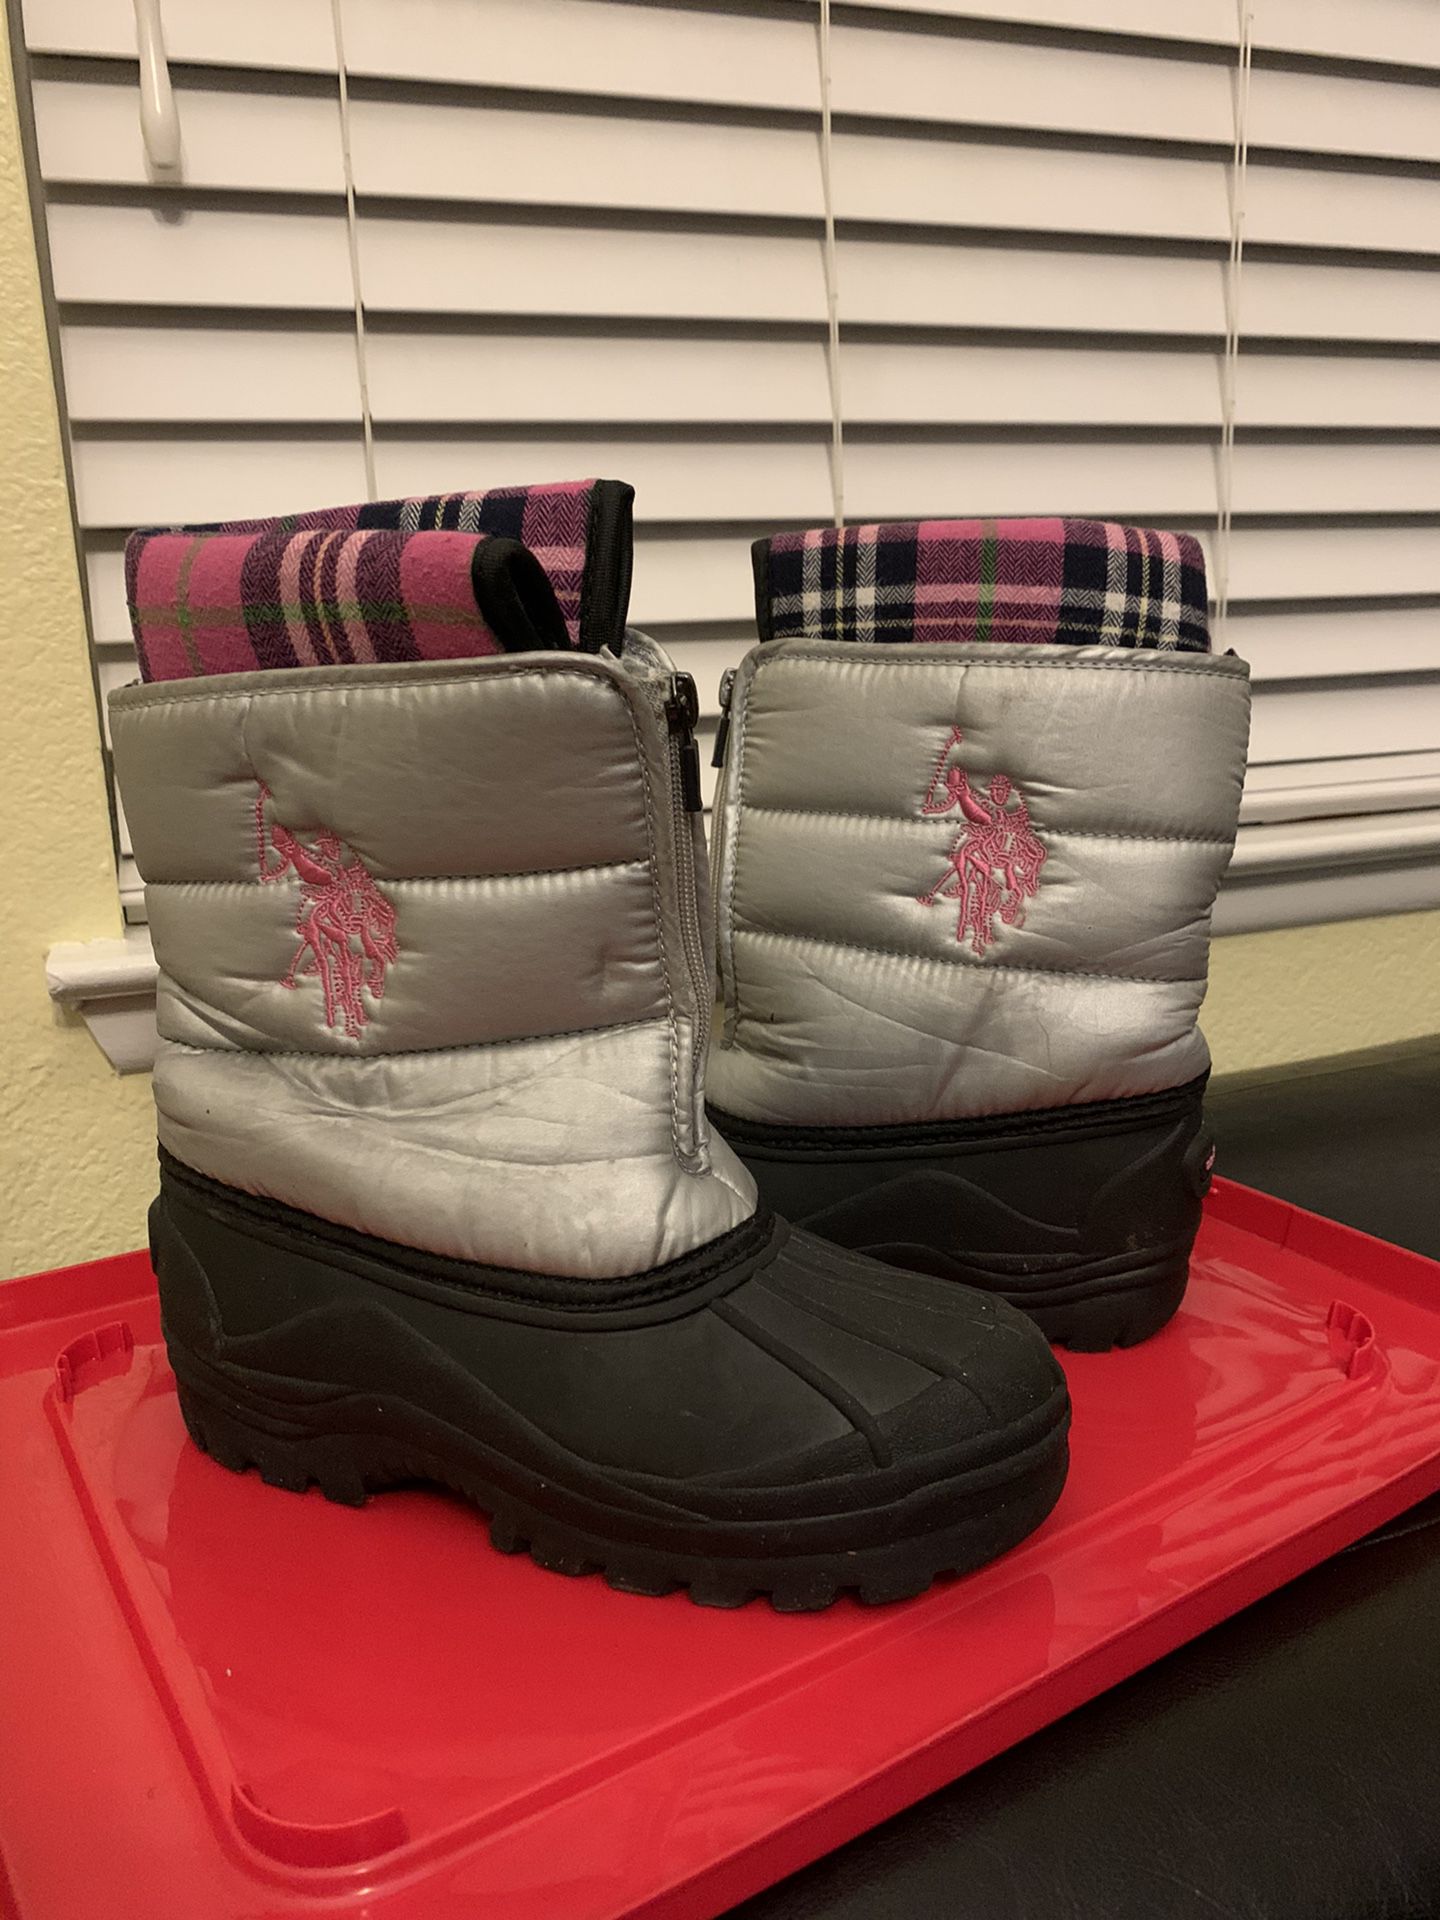 Snow boots for girl, size 2. $10 obo